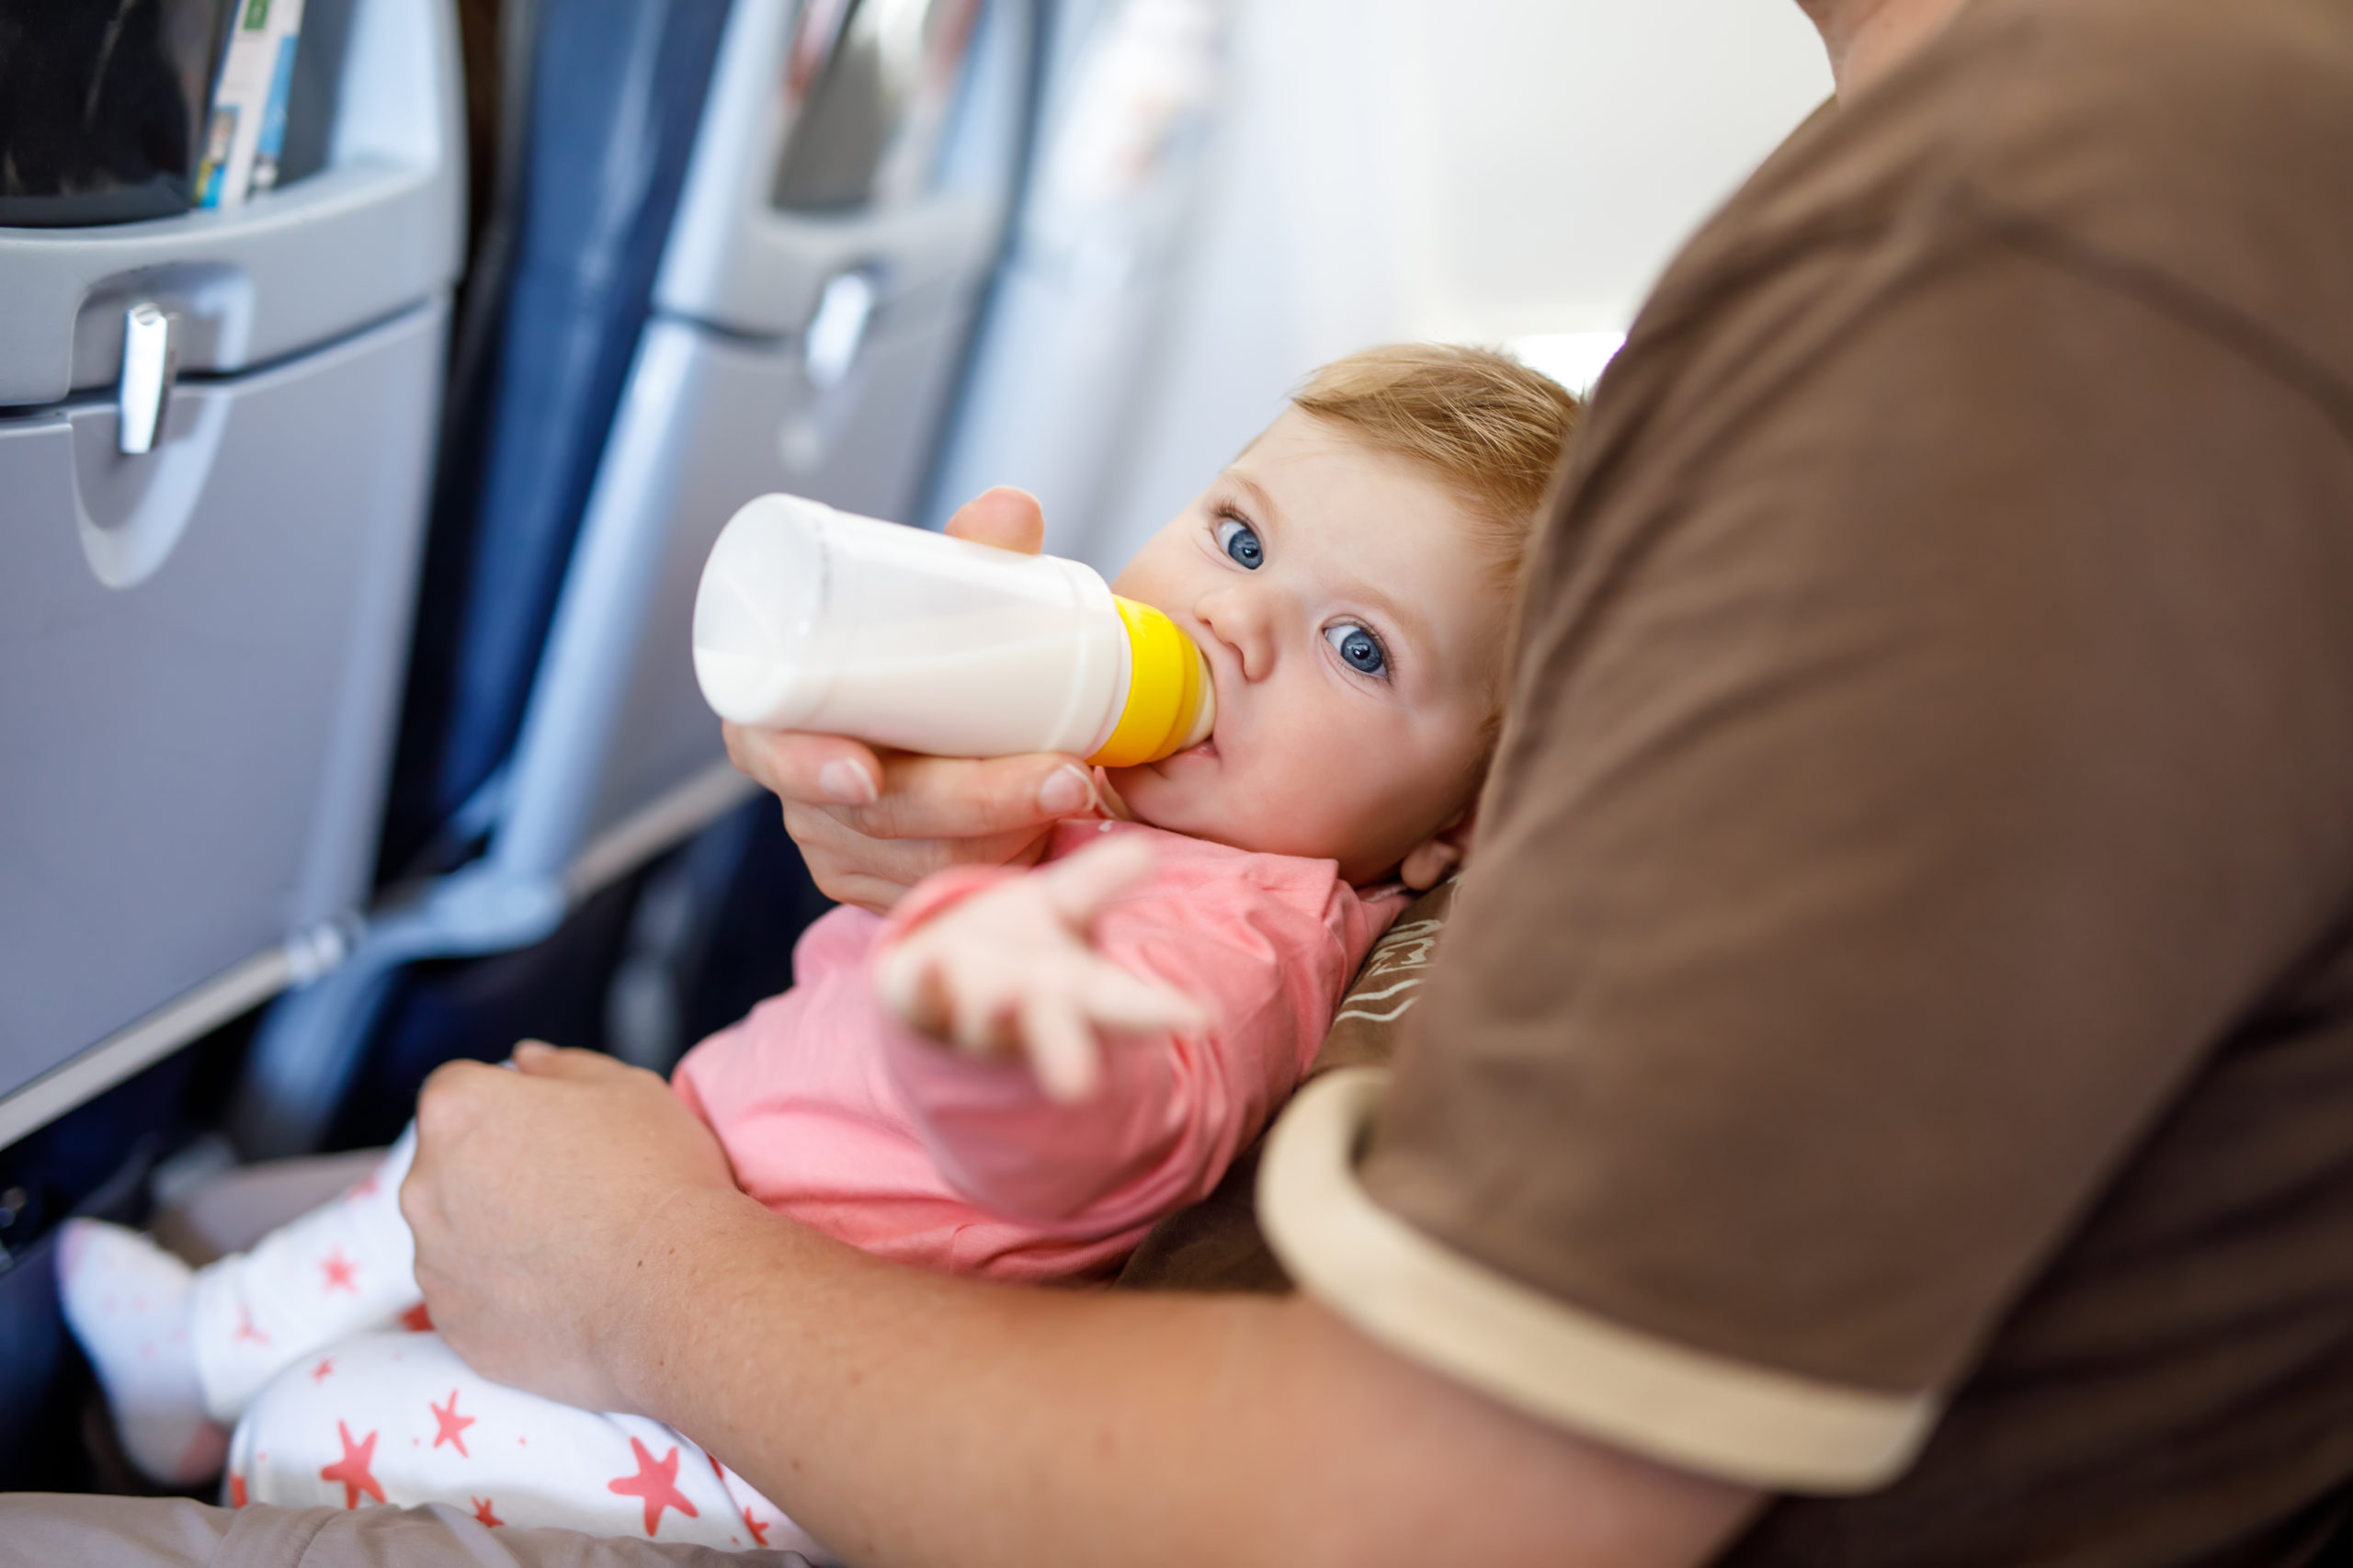 How to Travel Safely with Your Family